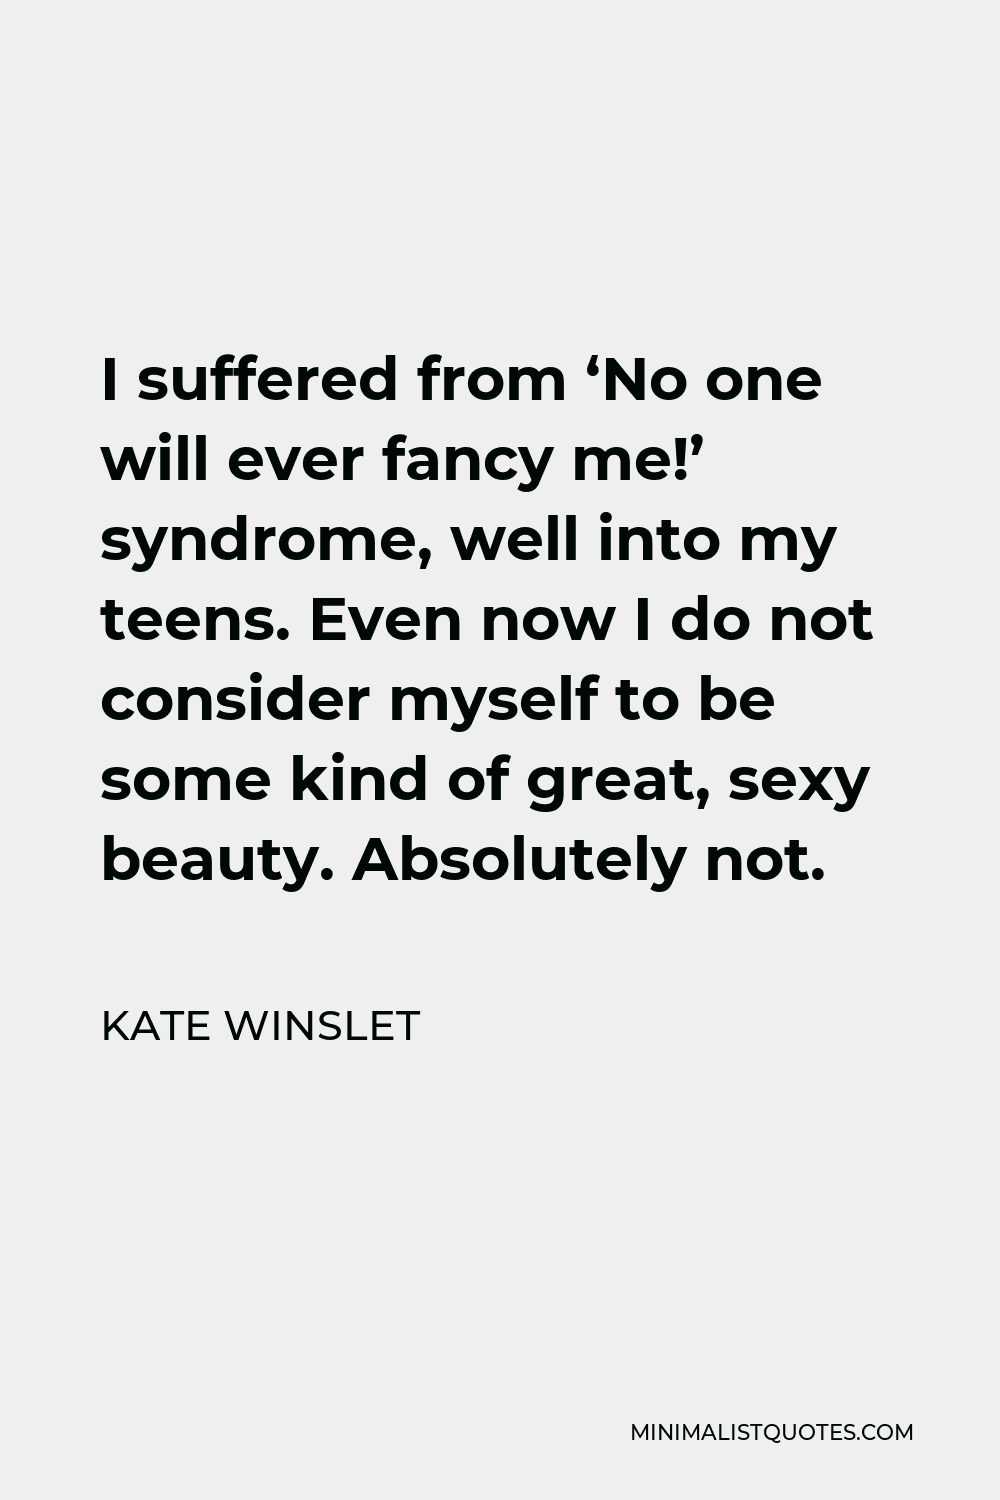 Kate Winslet Quote - I suffered from ‘No one will ever fancy me!’ syndrome, well into my teens. Even now I do not consider myself to be some kind of great, sexy beauty. Absolutely not.